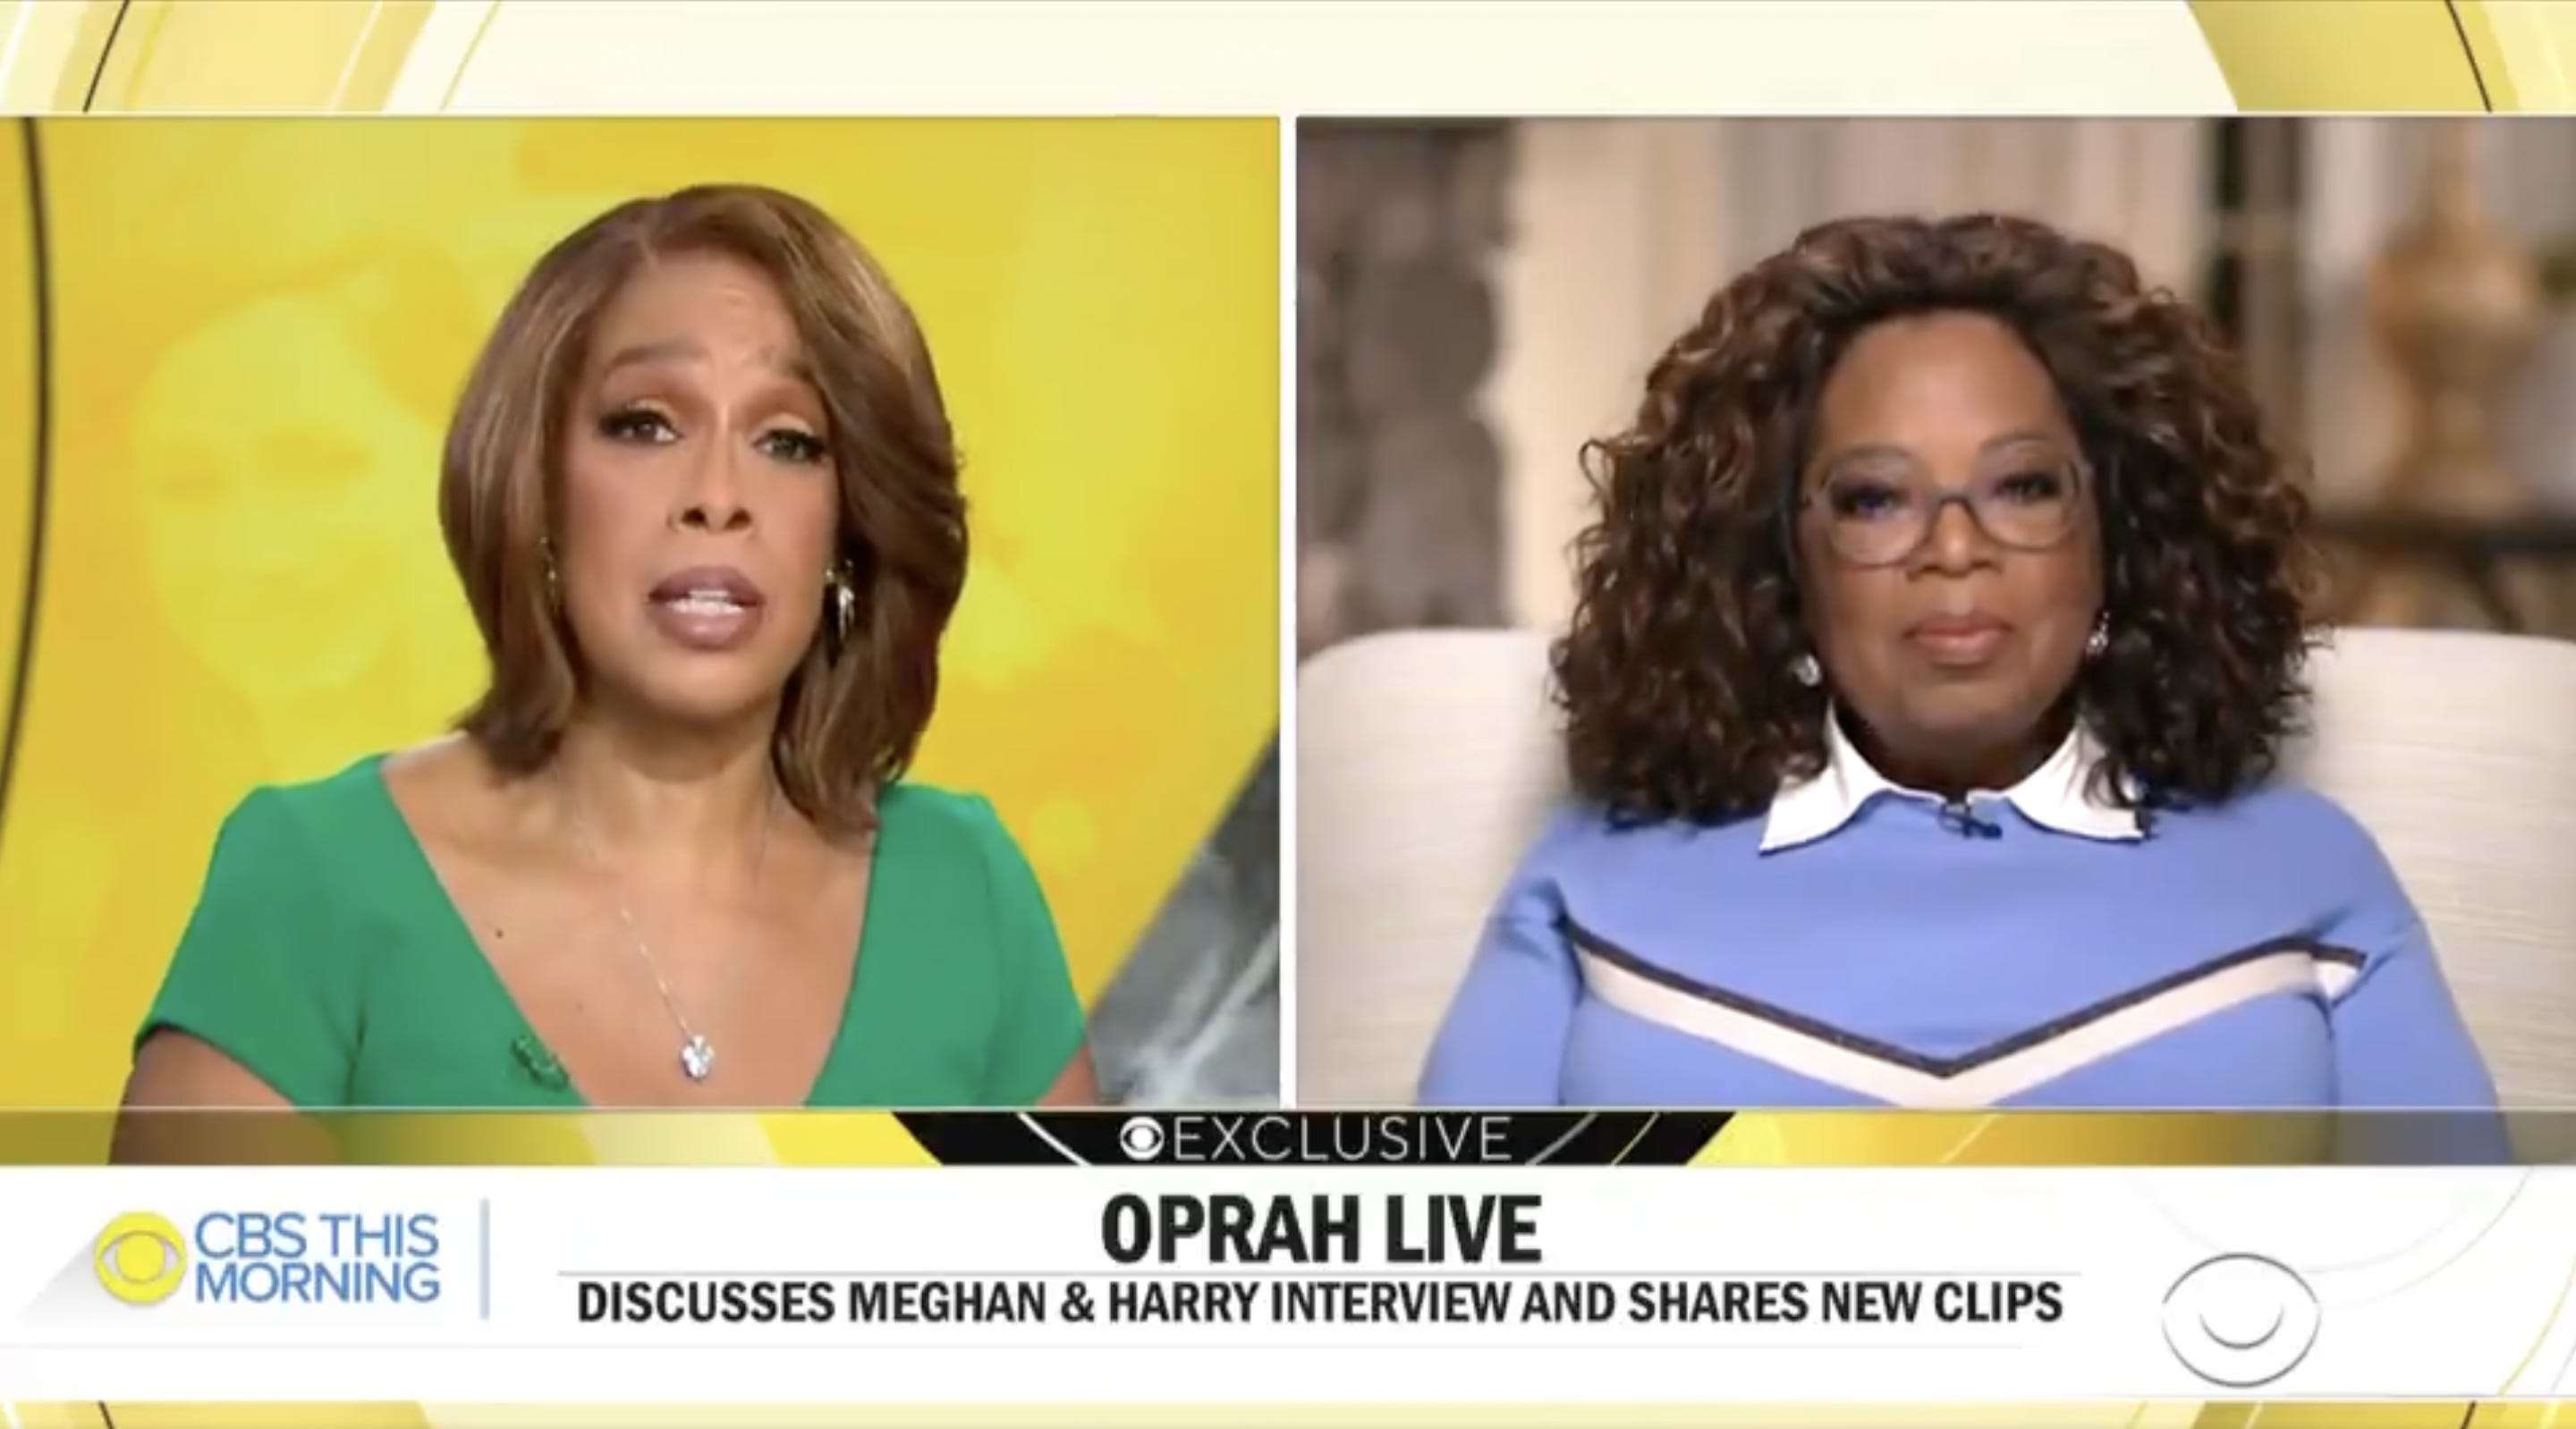 Oprah Shares 2 Moments From Her Meghan Markle And Prince Harry Interview That Surprised Her The